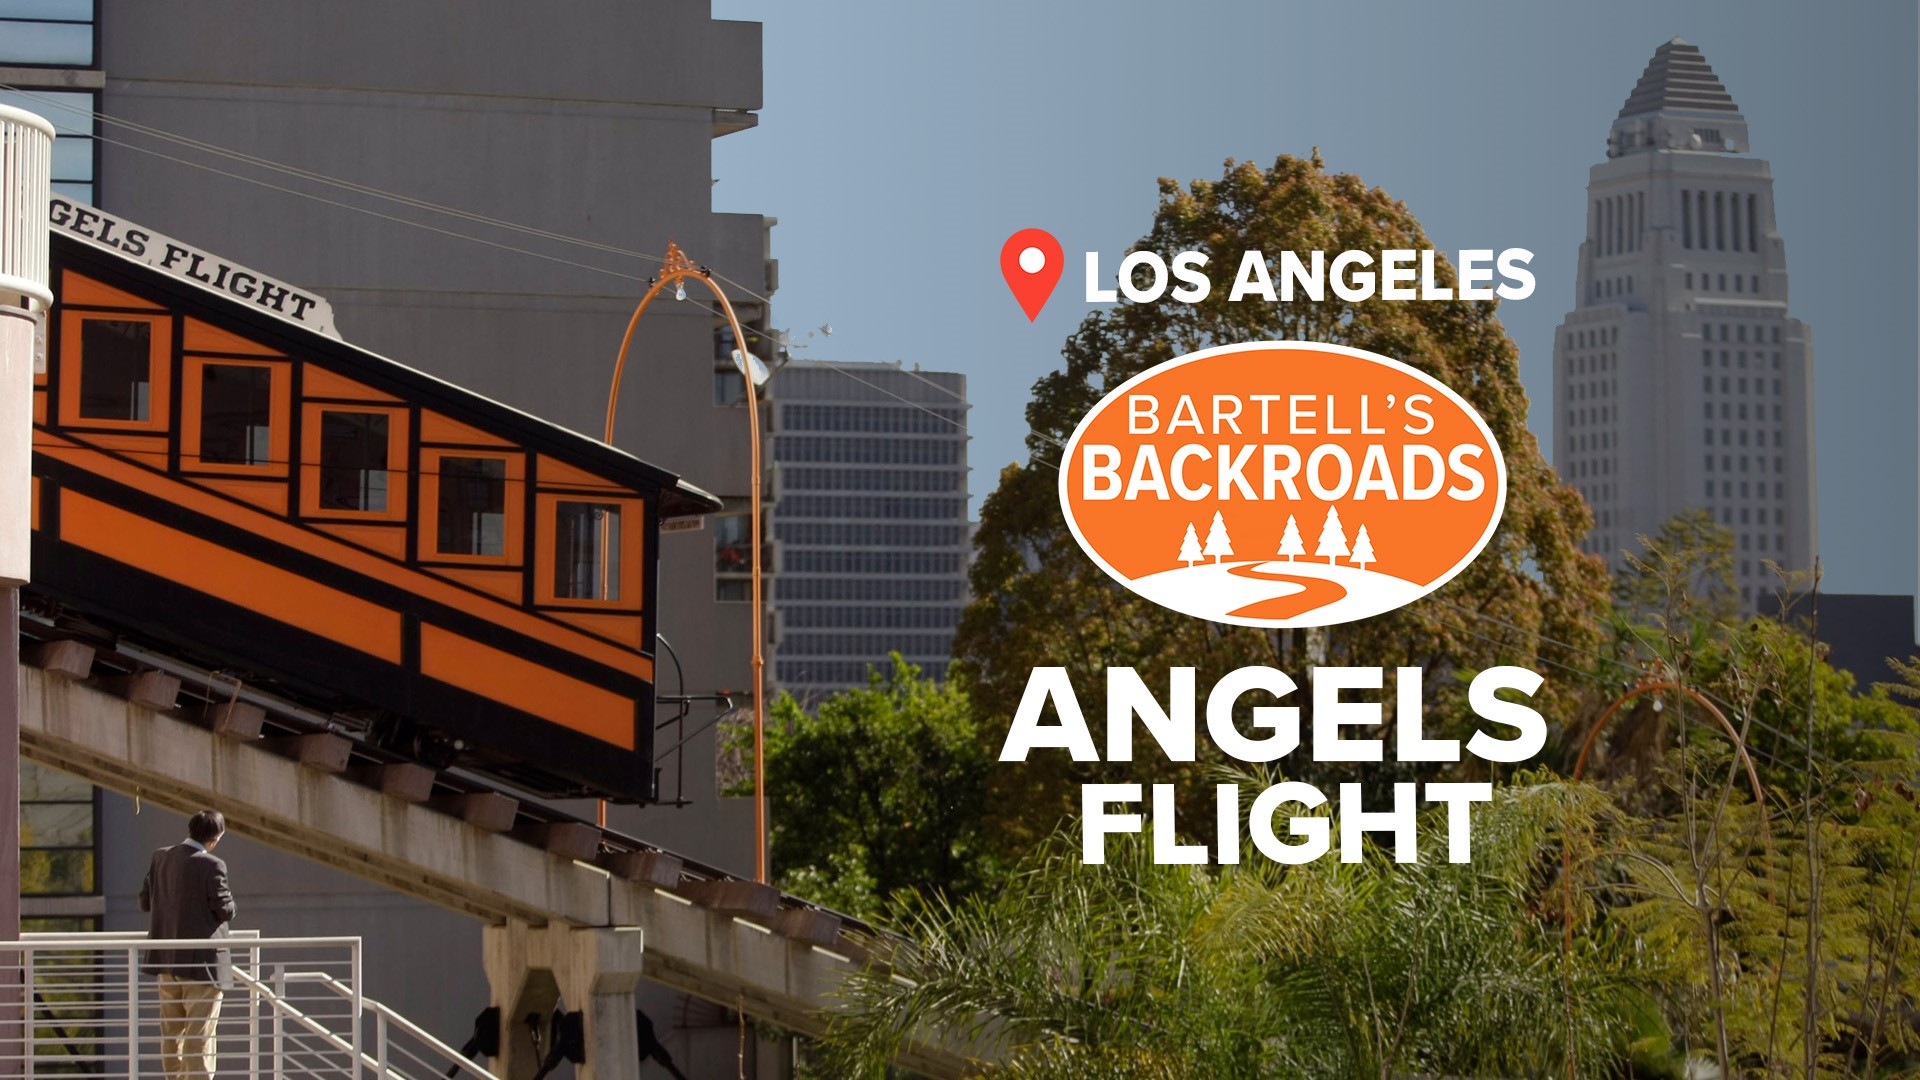 At 298 feet long, Angels Flight is the shortest railway in the world, but it's had a big impact on downtown Los Angeles.